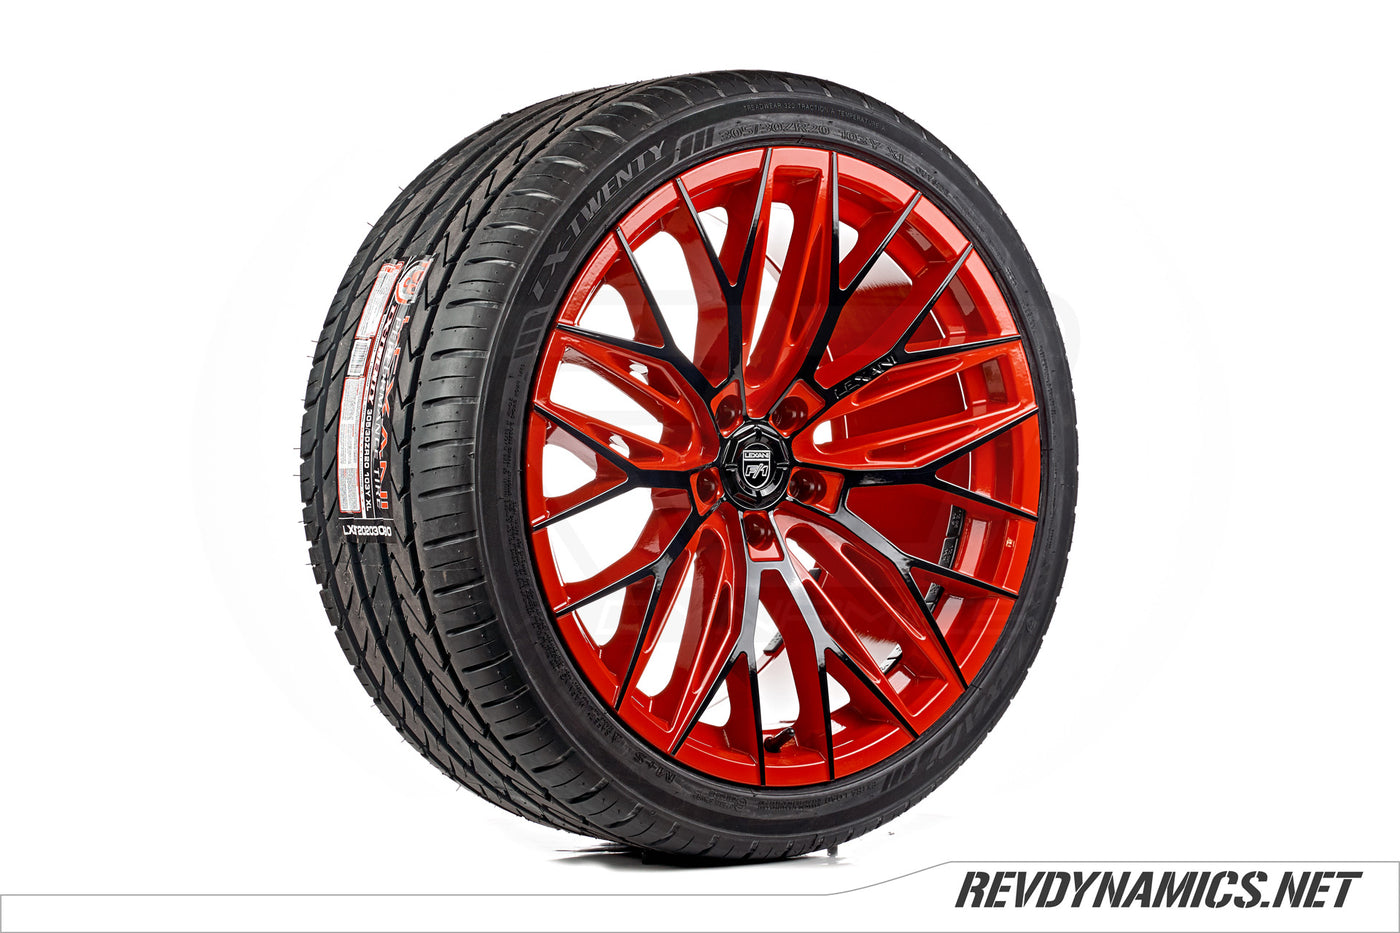 Lexani Aries 20" Rim Powdercoated Indy Red and Black Polaris Slingshot colors 